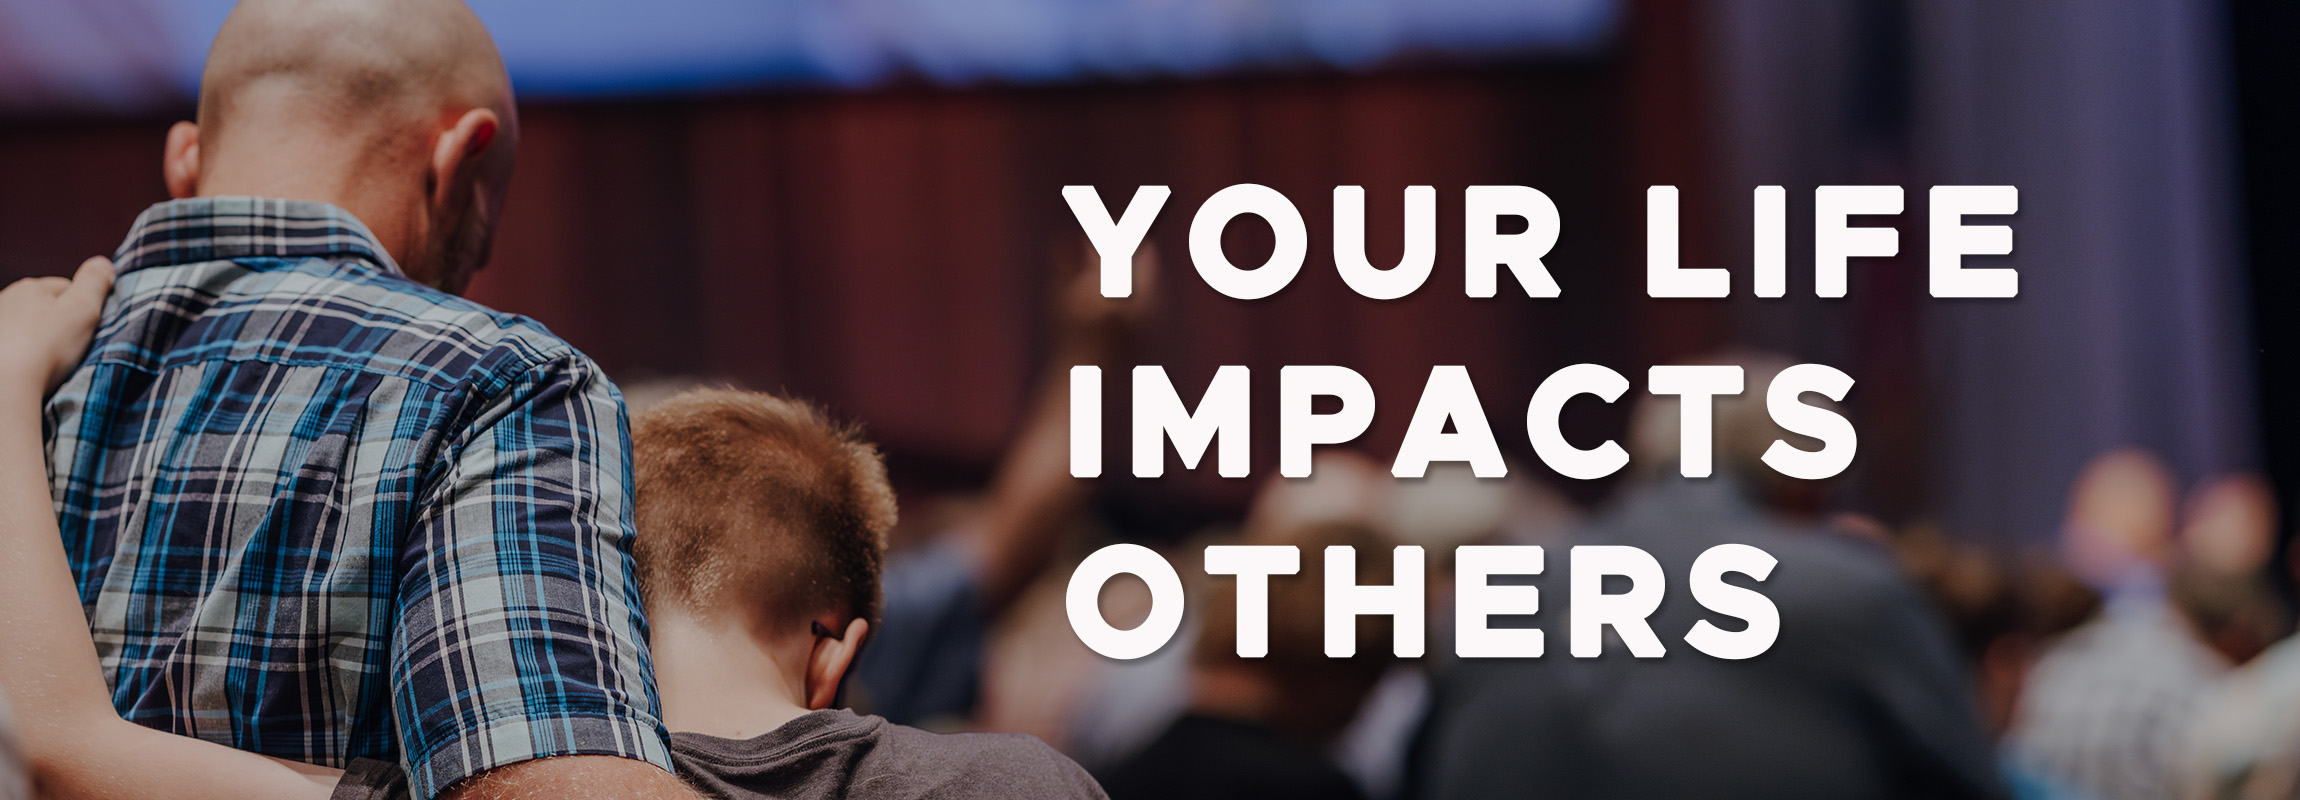 Your Life Impacts Others!